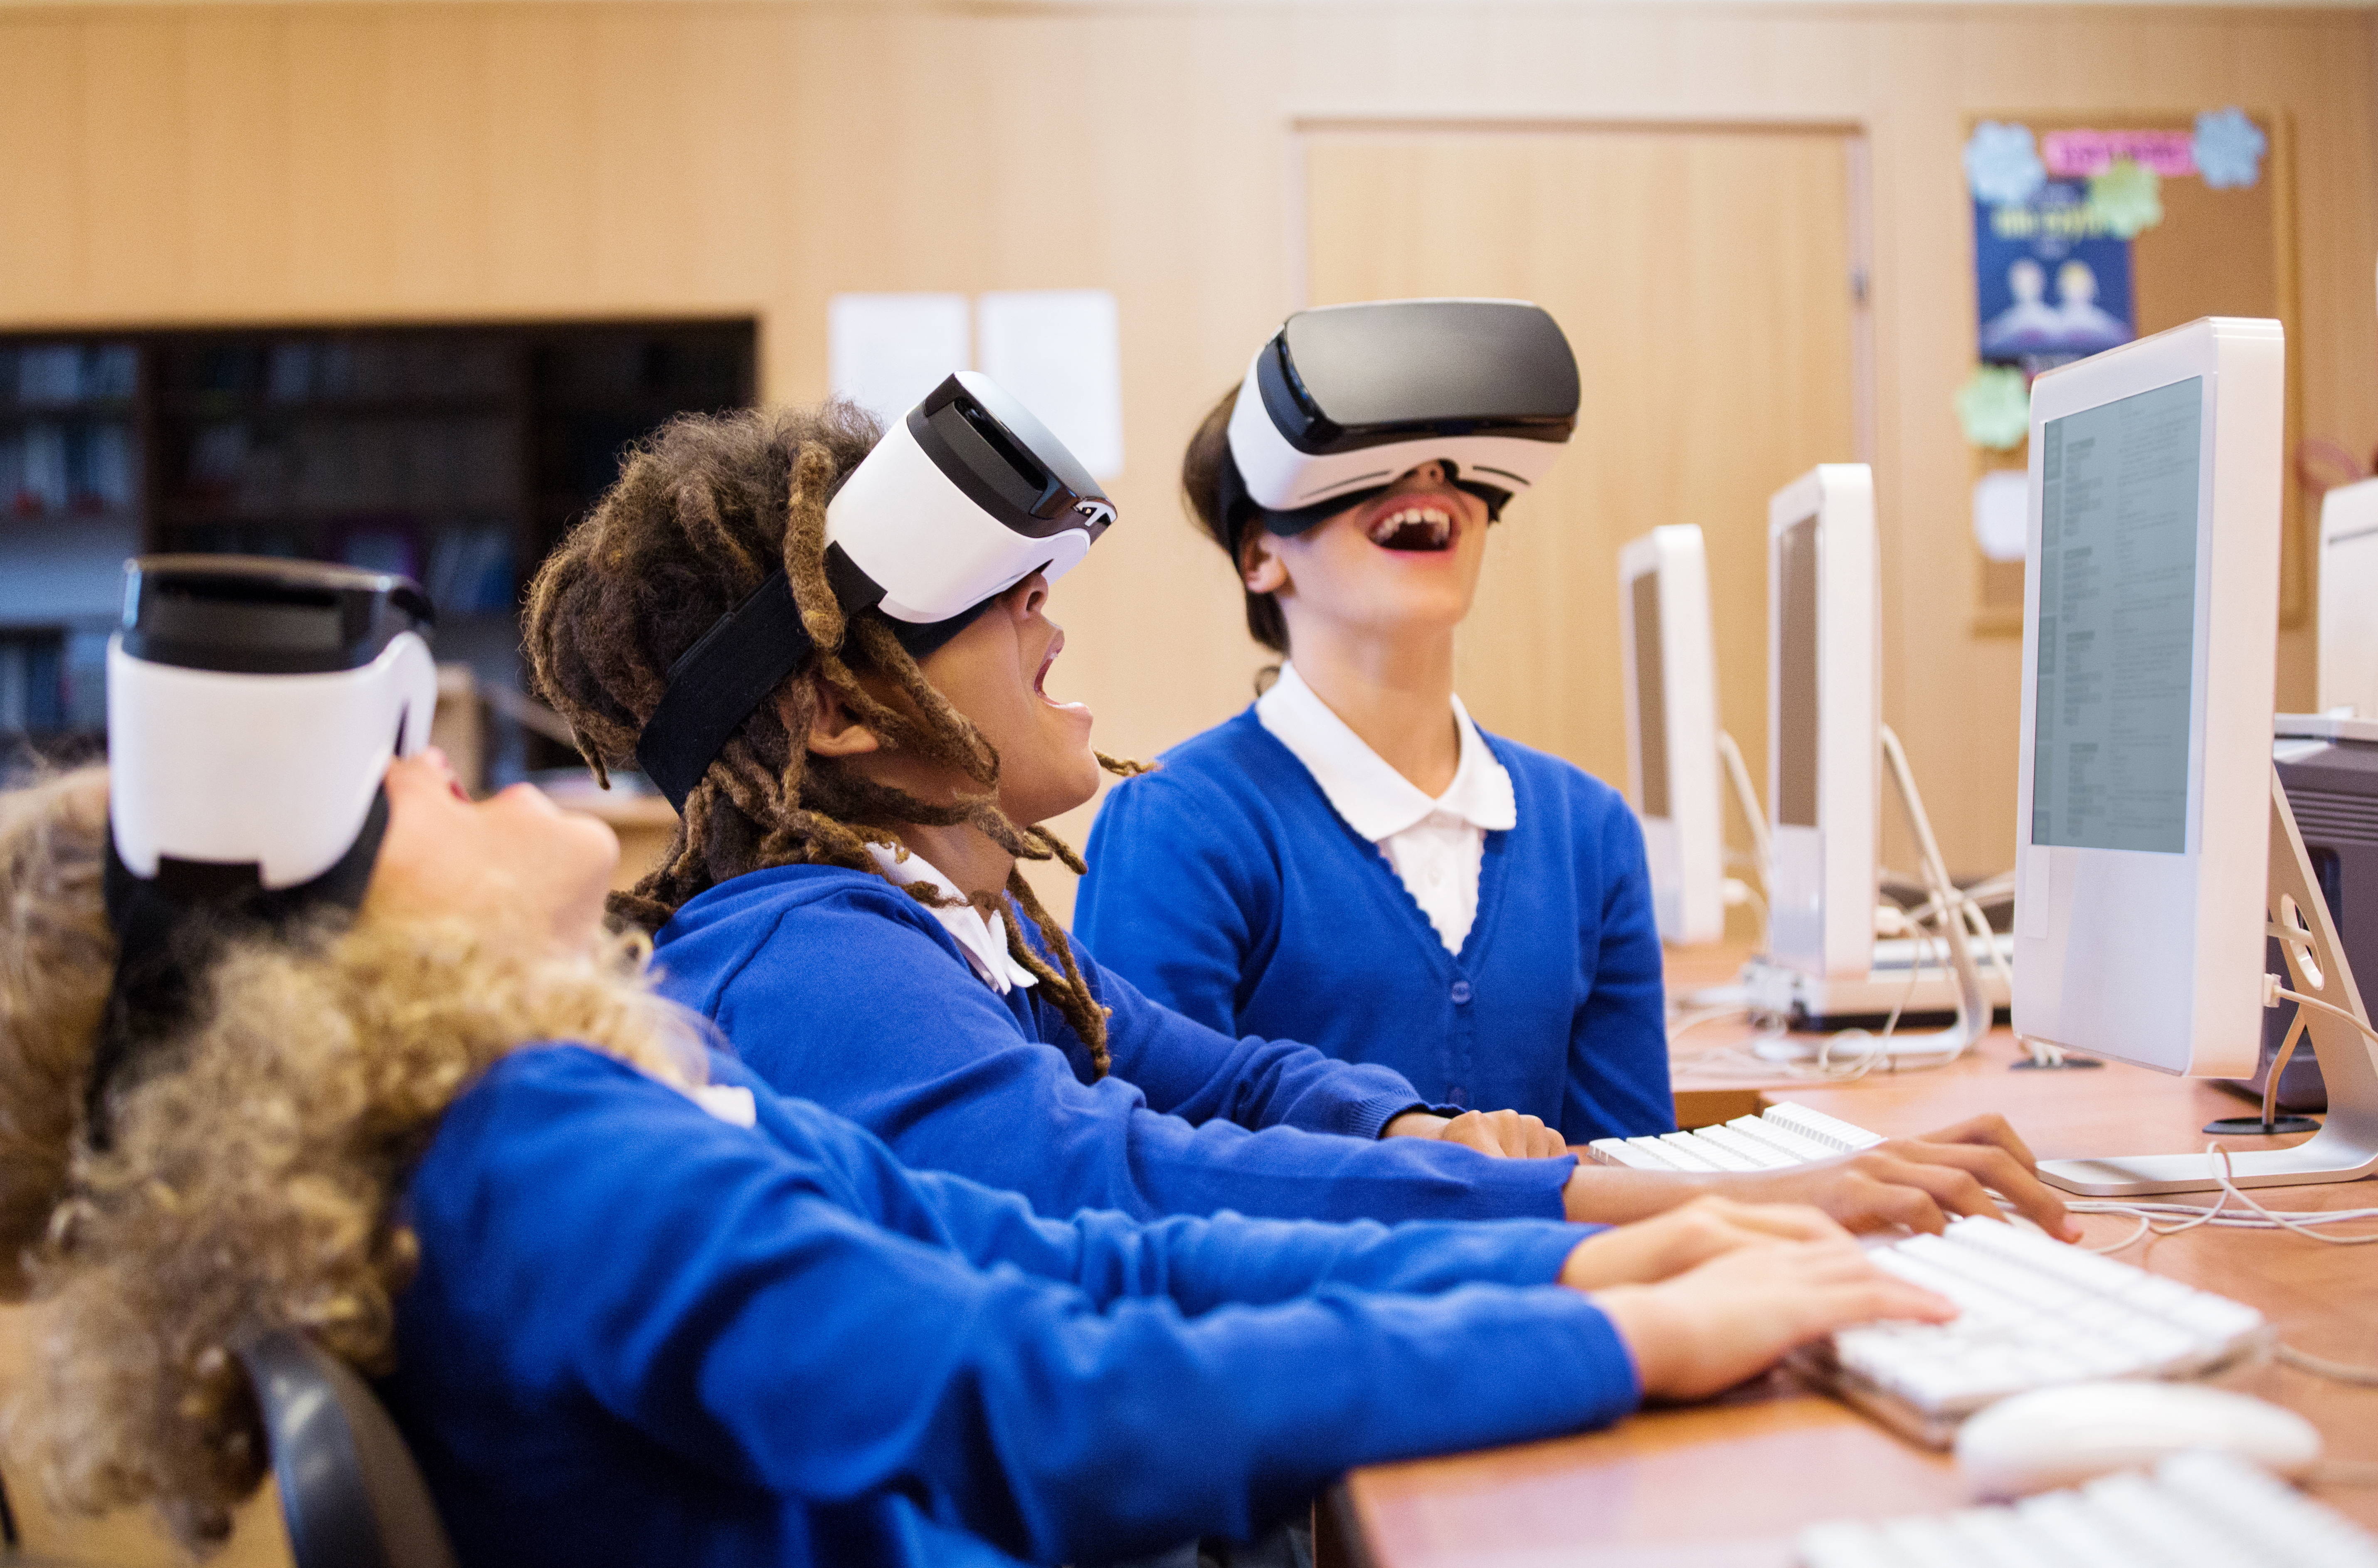 Students with virtual reality headsets at a computer.